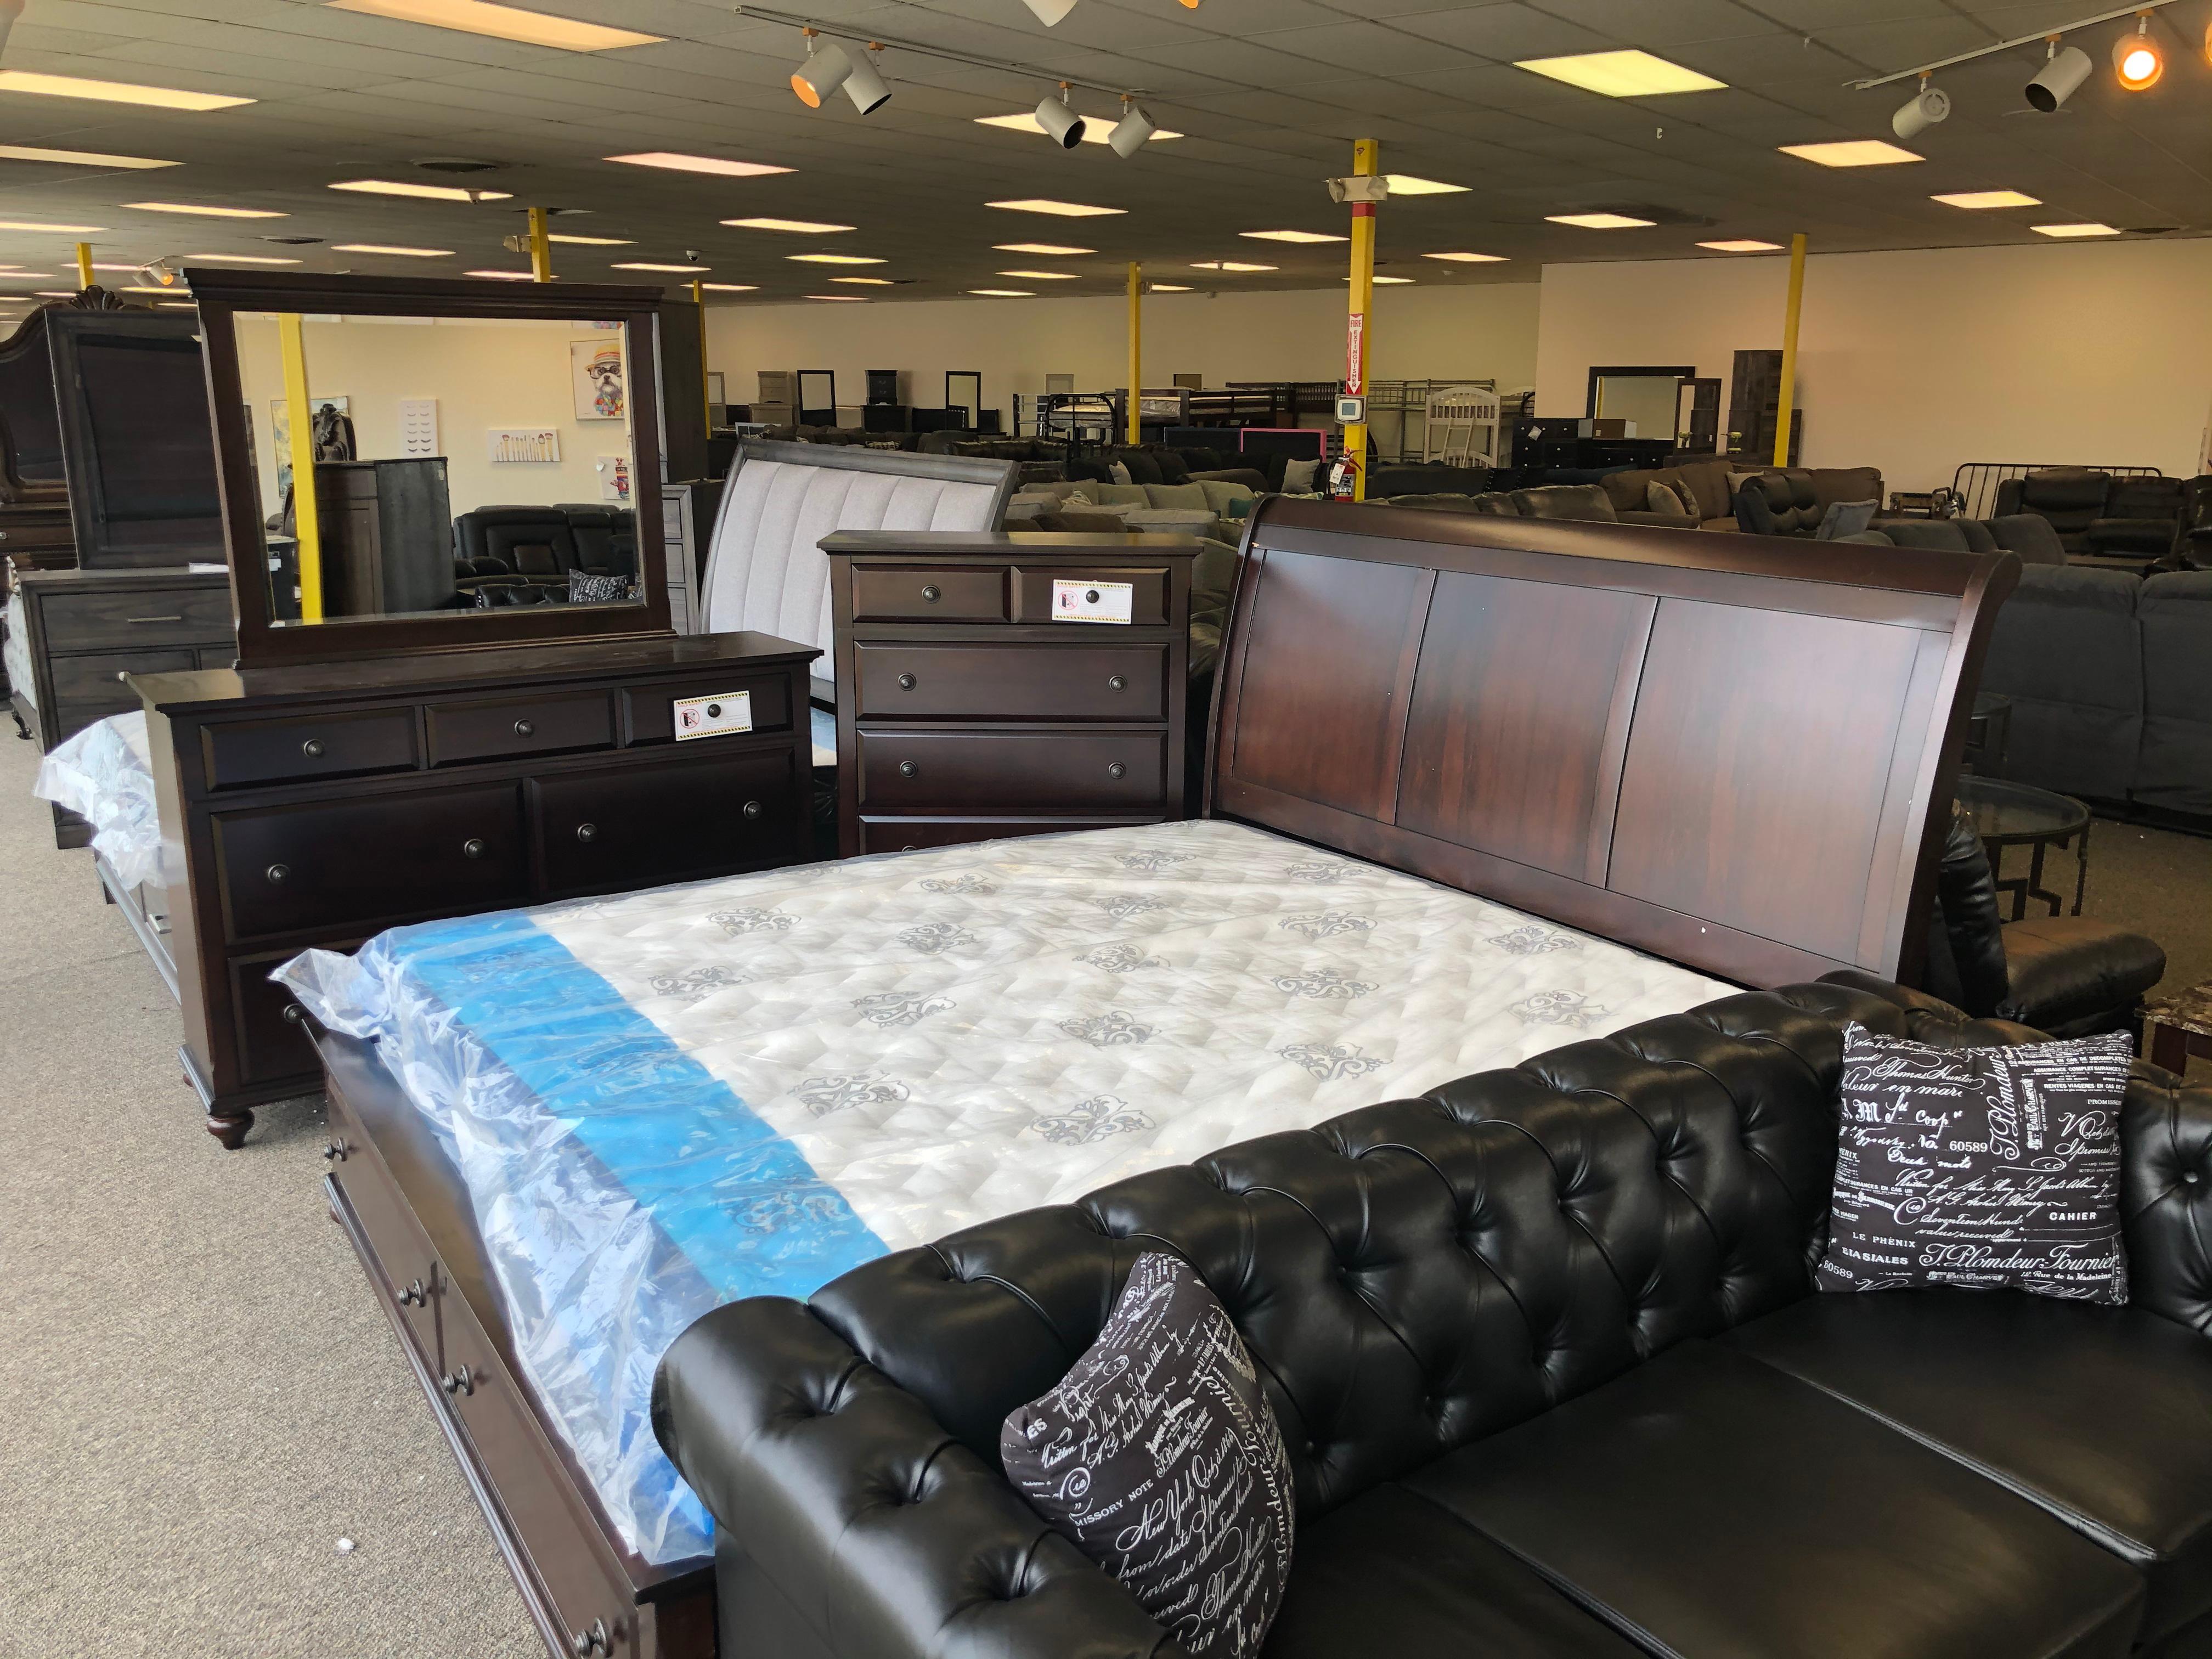 Quality Furniture, Discount Prices